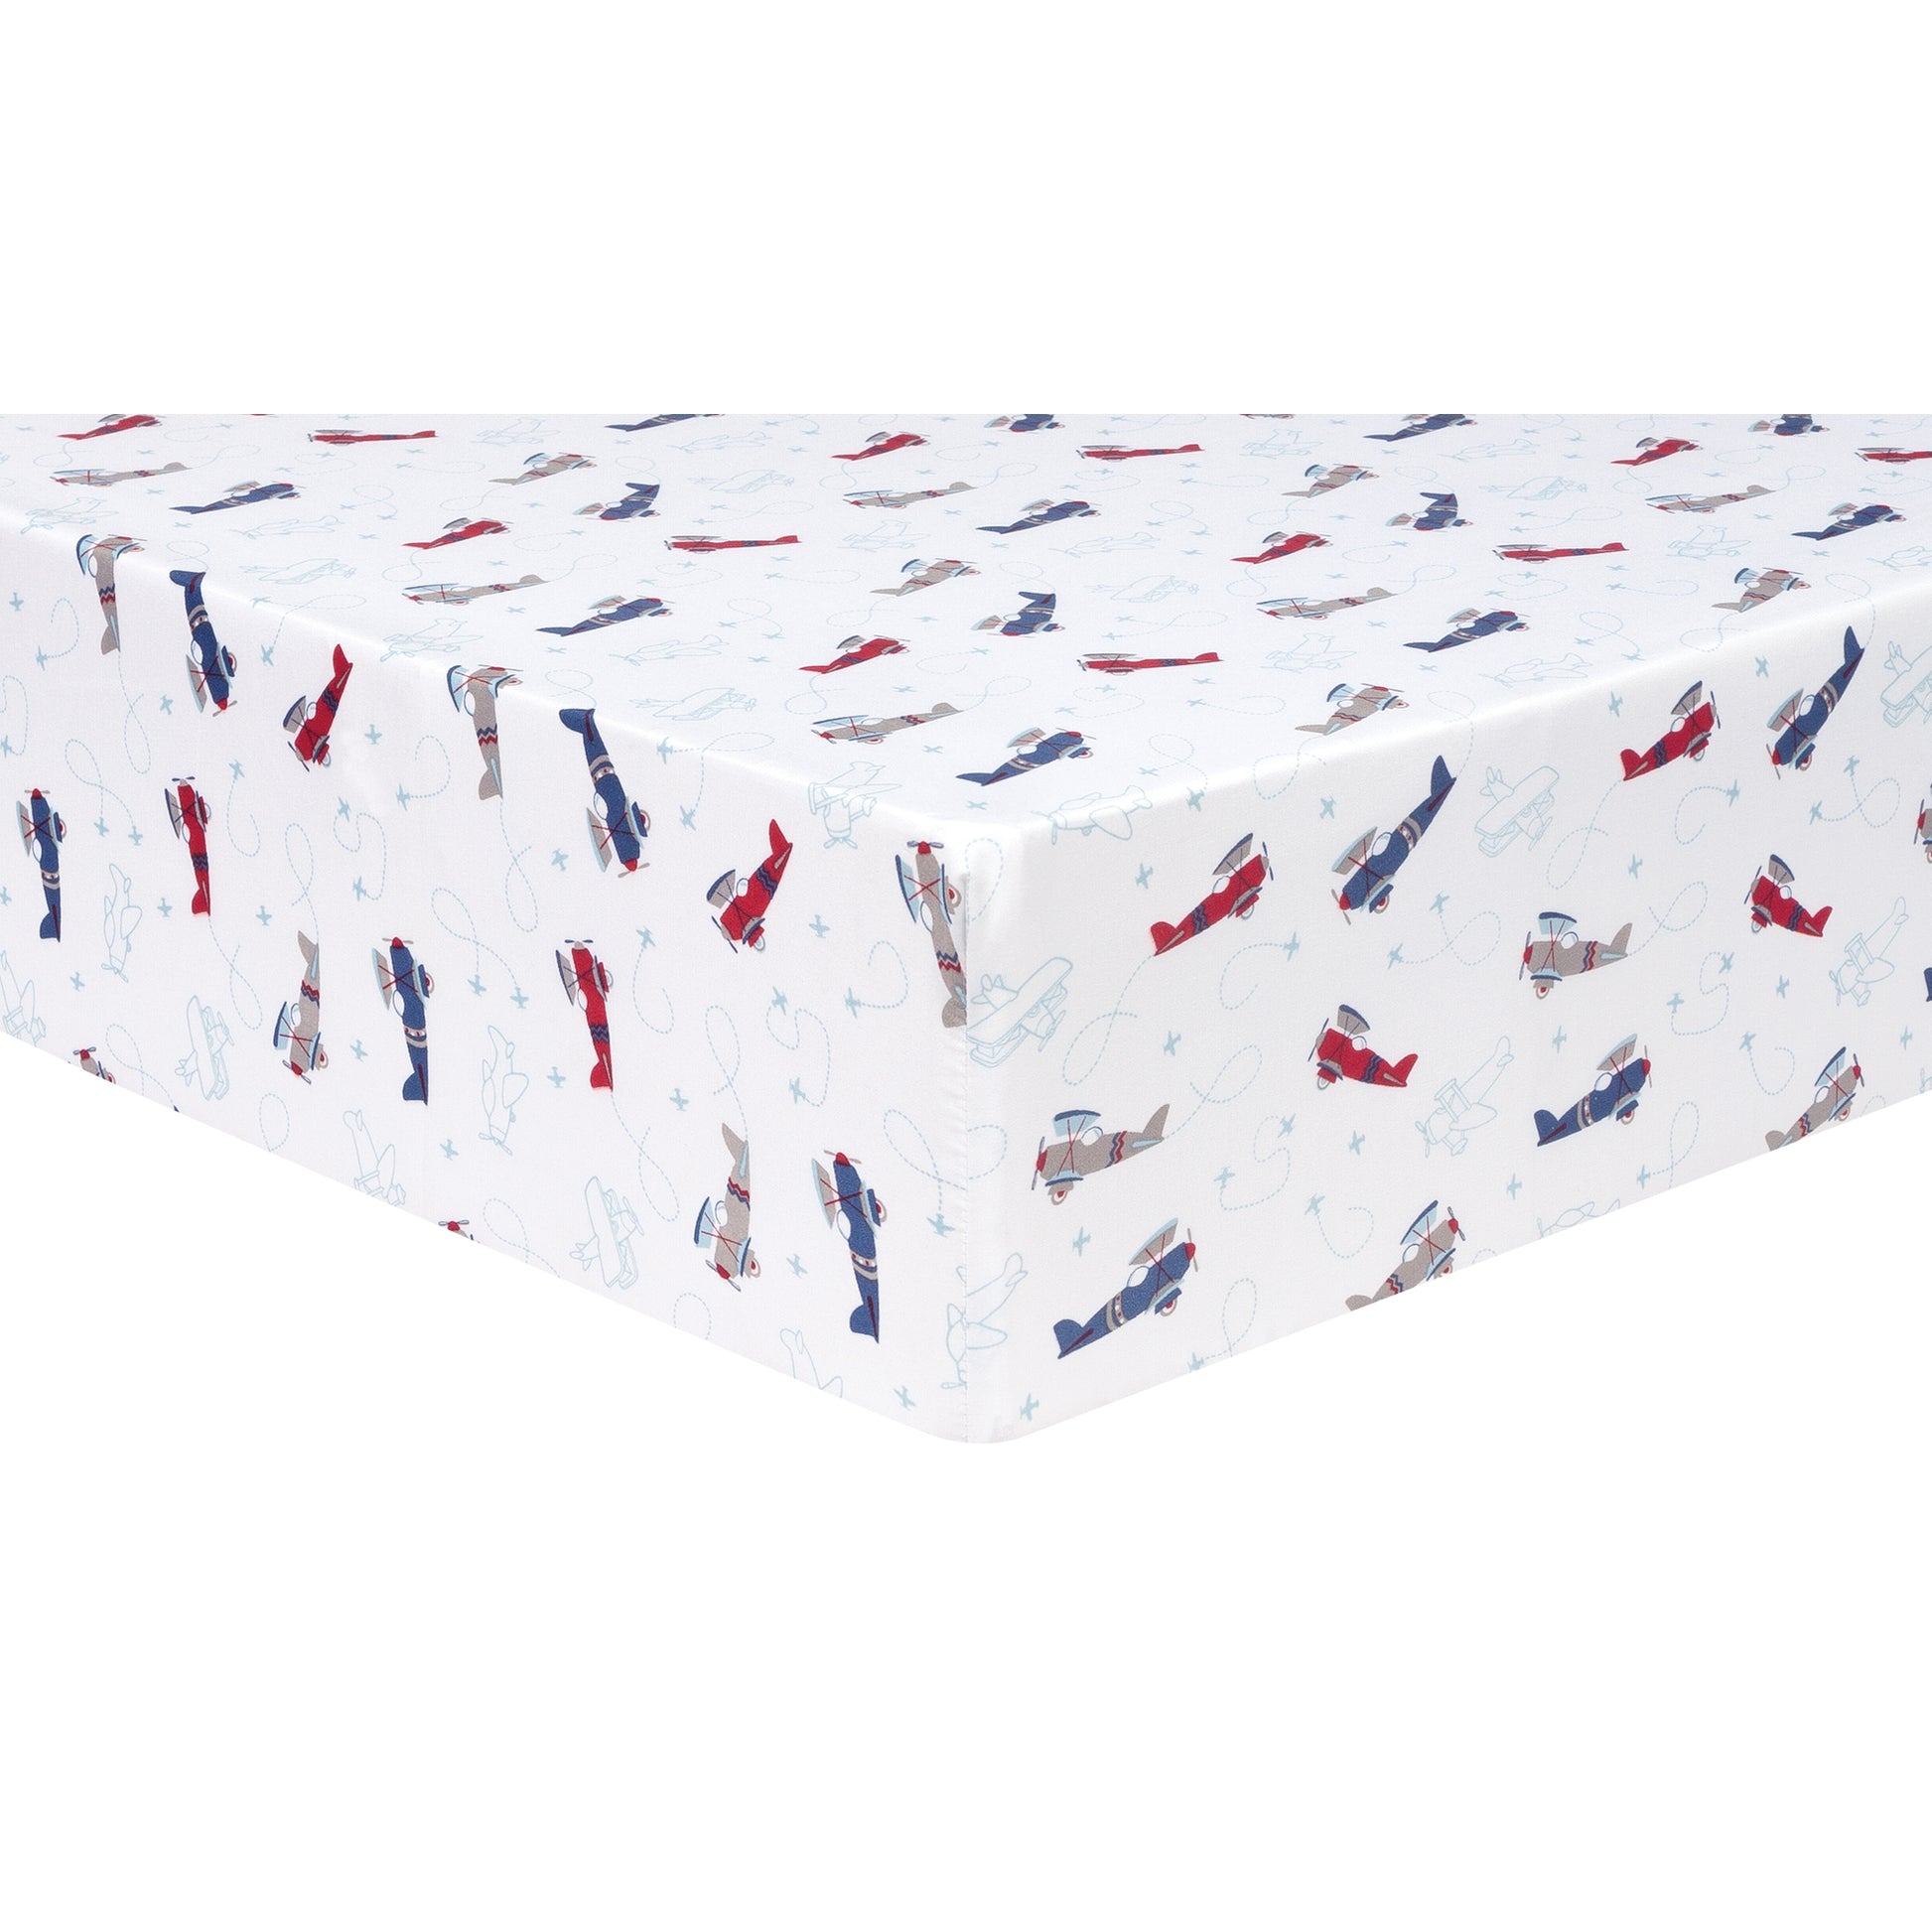 Corner View of Sammy and Lou Adventure Awaits 4 Piece Crib Bedding Set Crib Sheet that features Red and Navy Airplanes